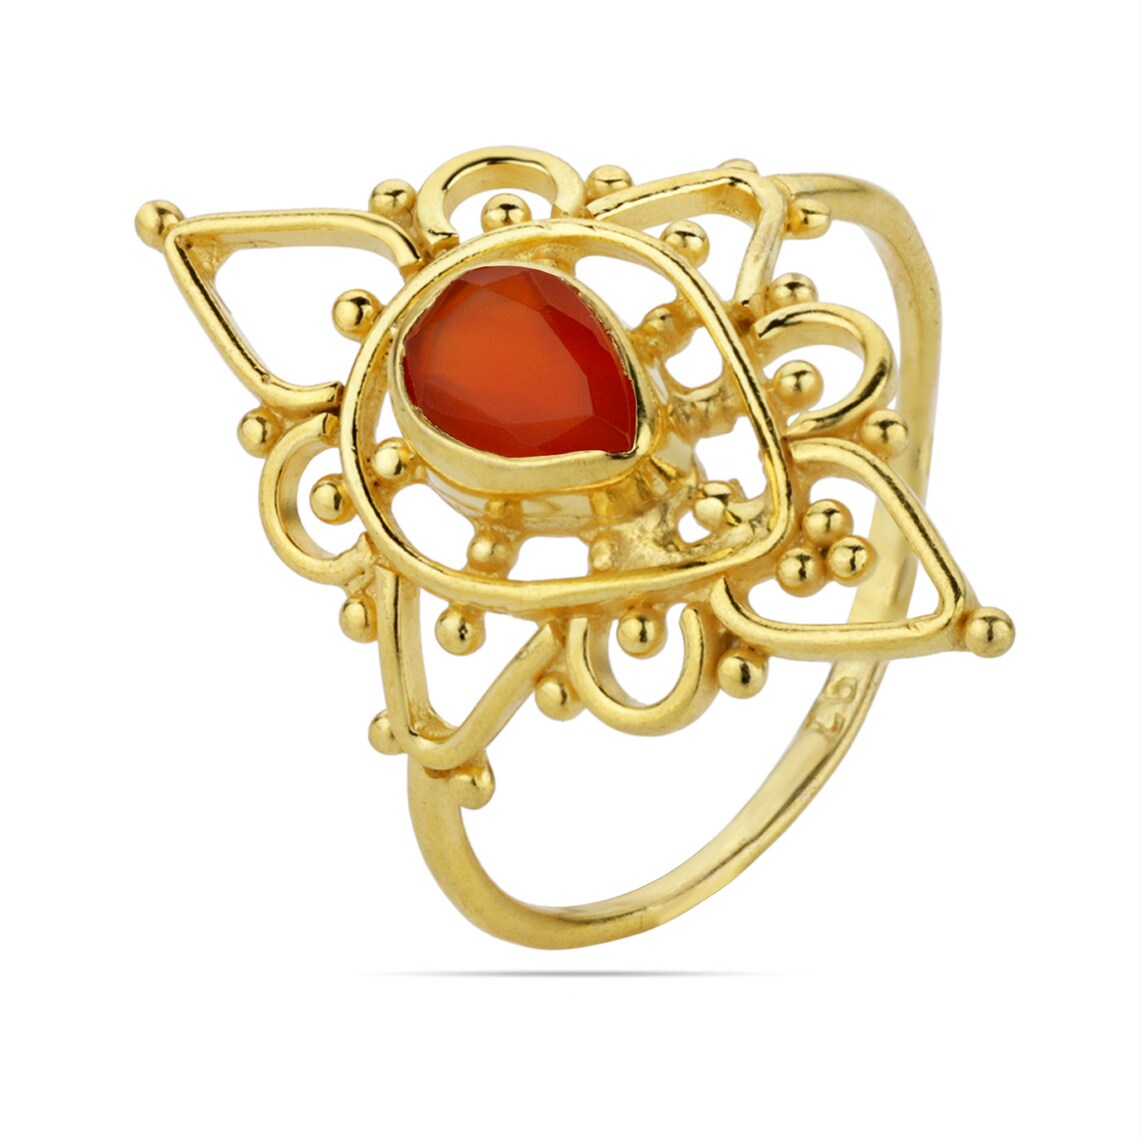 Natural Carnelian ring, 925 Sterling Silver Ring, Gold Plated Ring, Promise Ring, Handmade Ring, Statement Ring, August Birthstone Ring